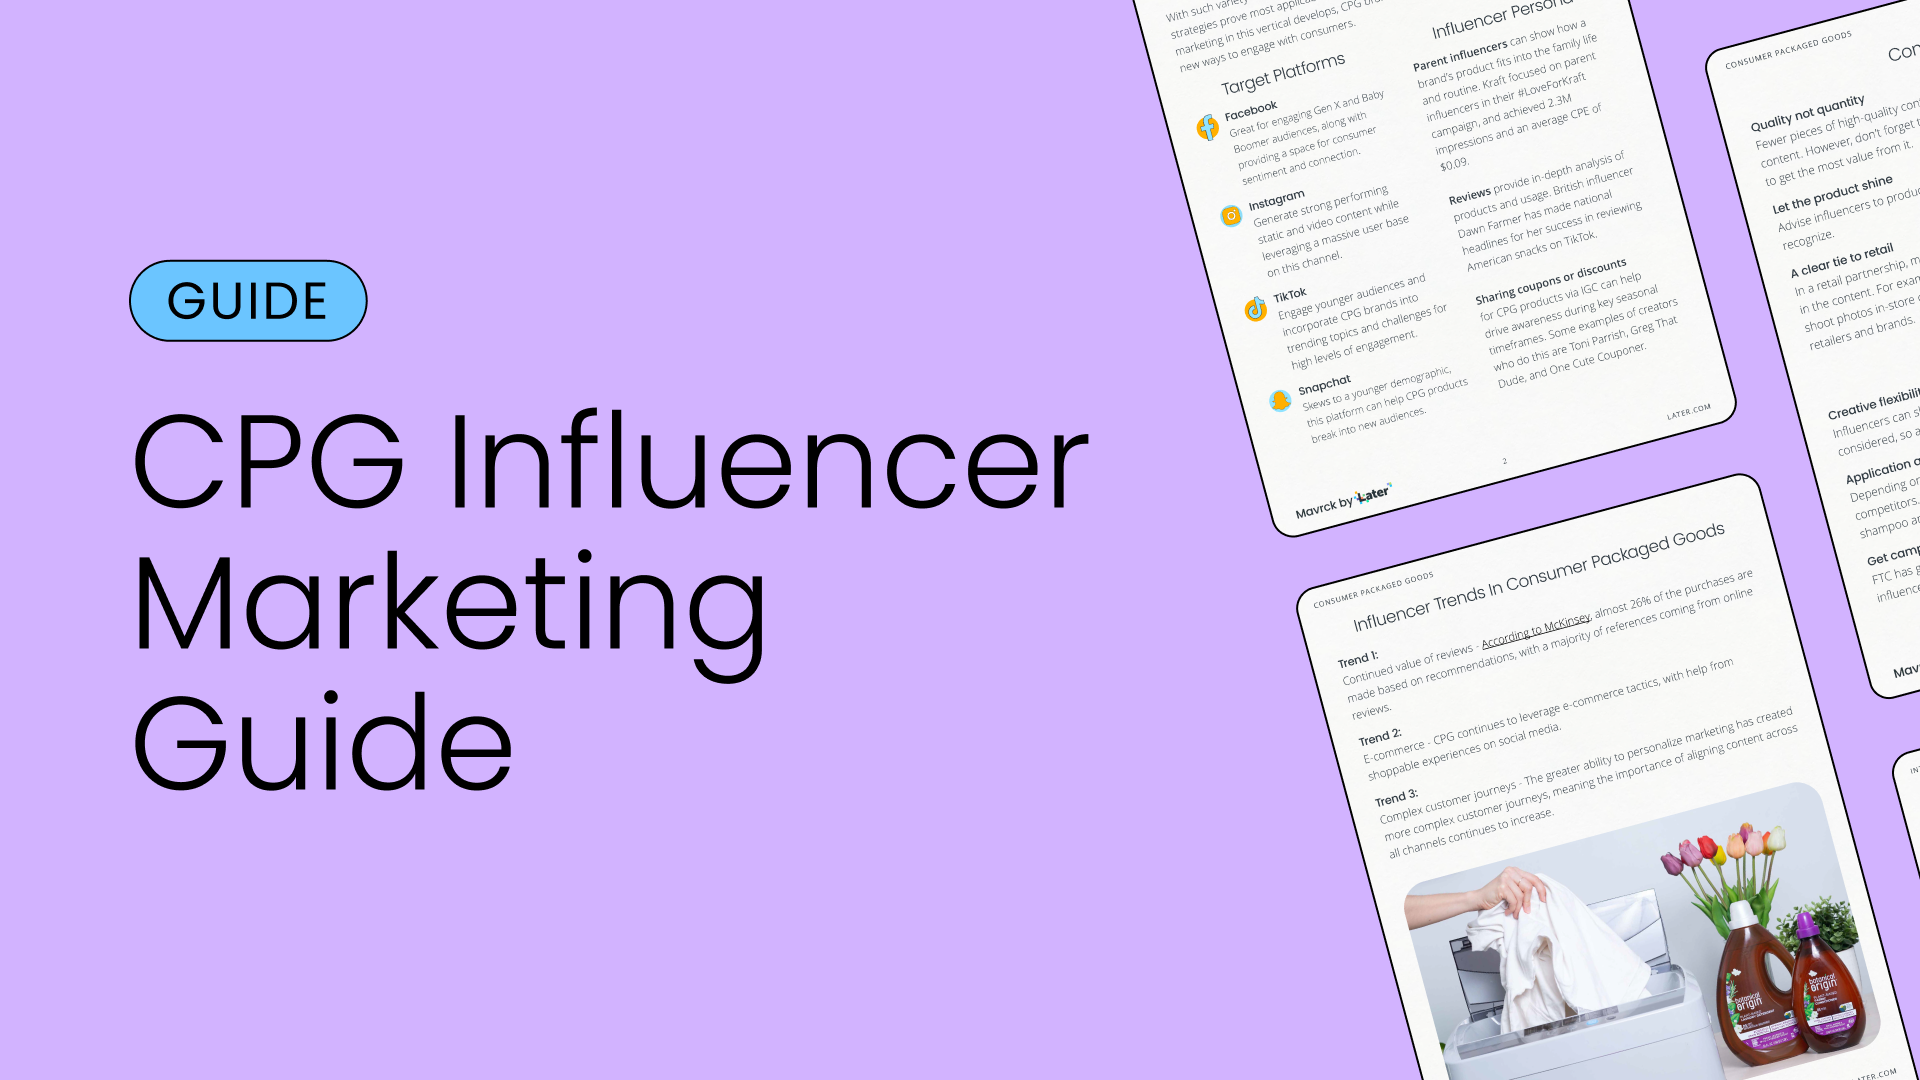 Free influencer marketing guide for consumer packaged goods brands from Later